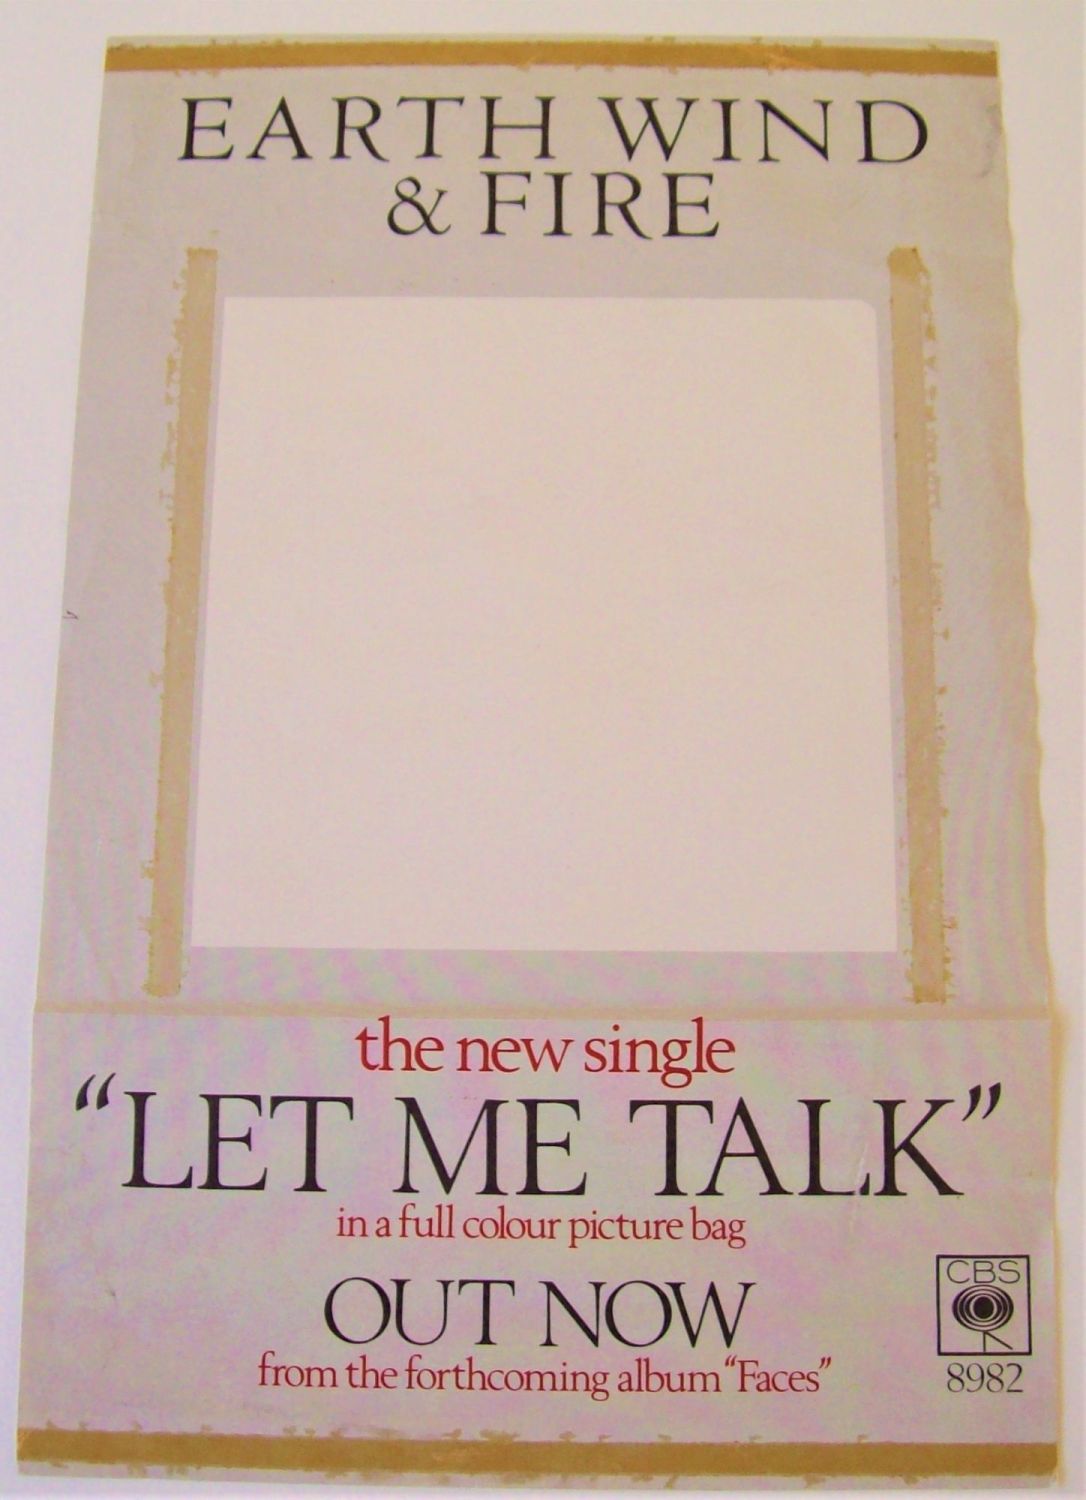 EARTH WIND AND FIRE RECORD COMPANY PROMO WINDOW POSTER SINGLE 'LET ME TALK'